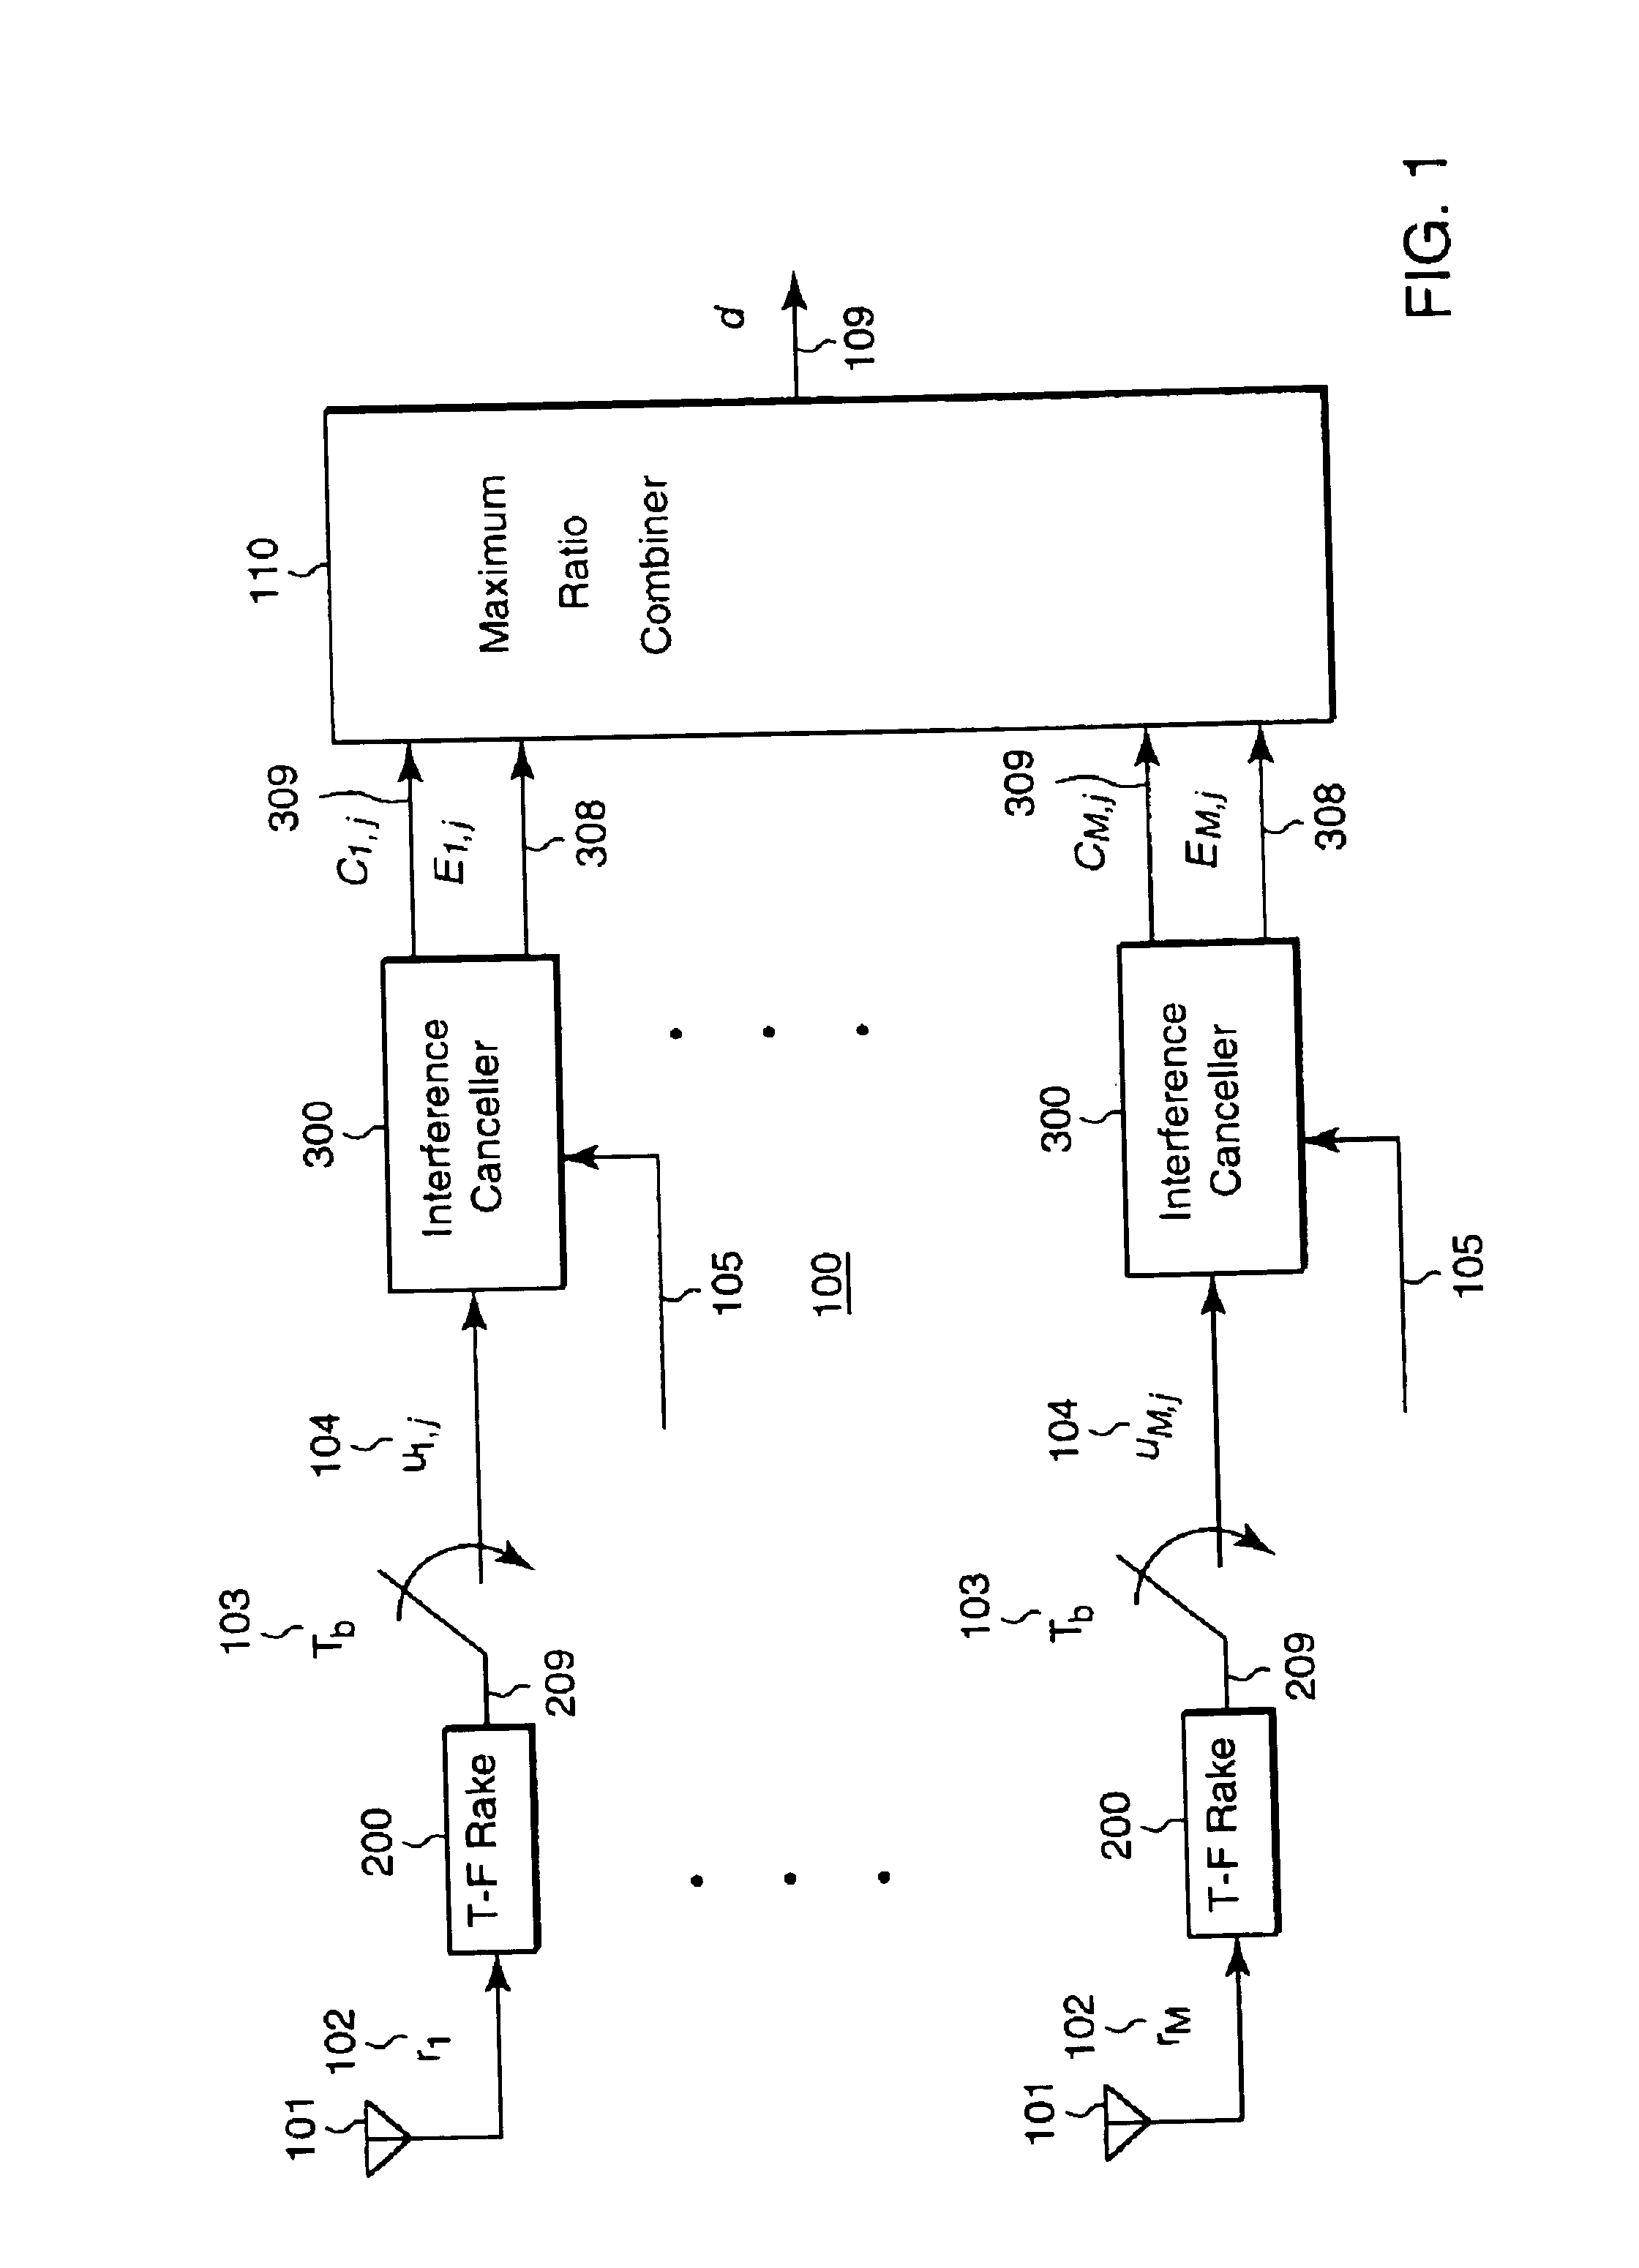 Adaptive DS-CDMA multi-user receiver with diversity combining for interference cancellation